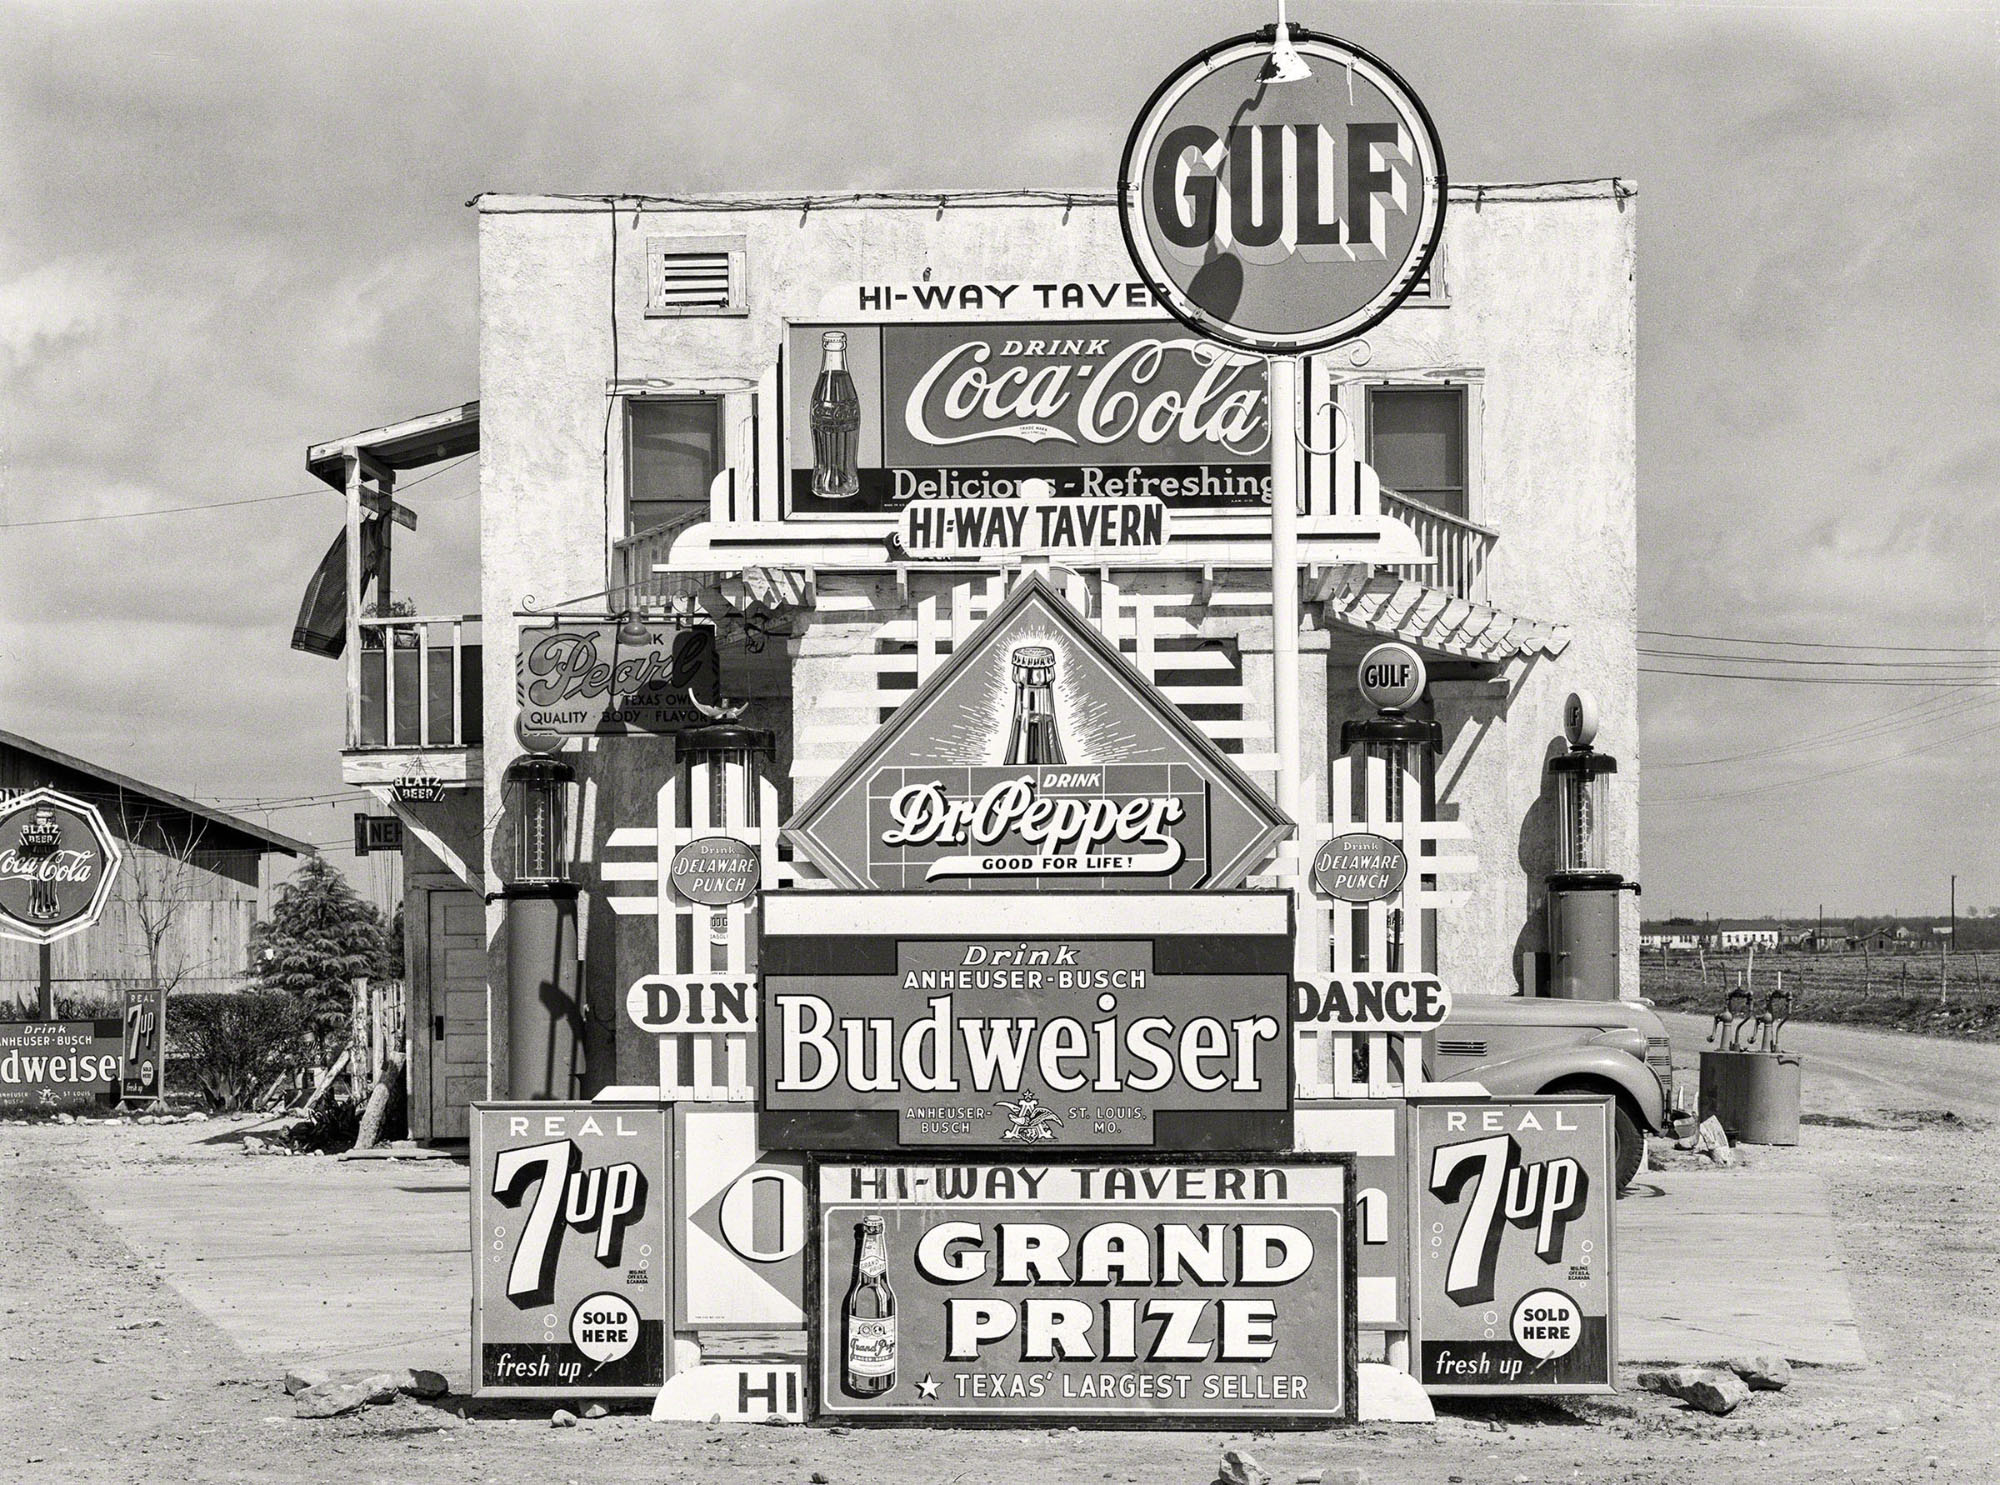 Beverage signs at a Gulf store, including Coca-Cola, Dr. Pepper, Budweiser and 7 Up